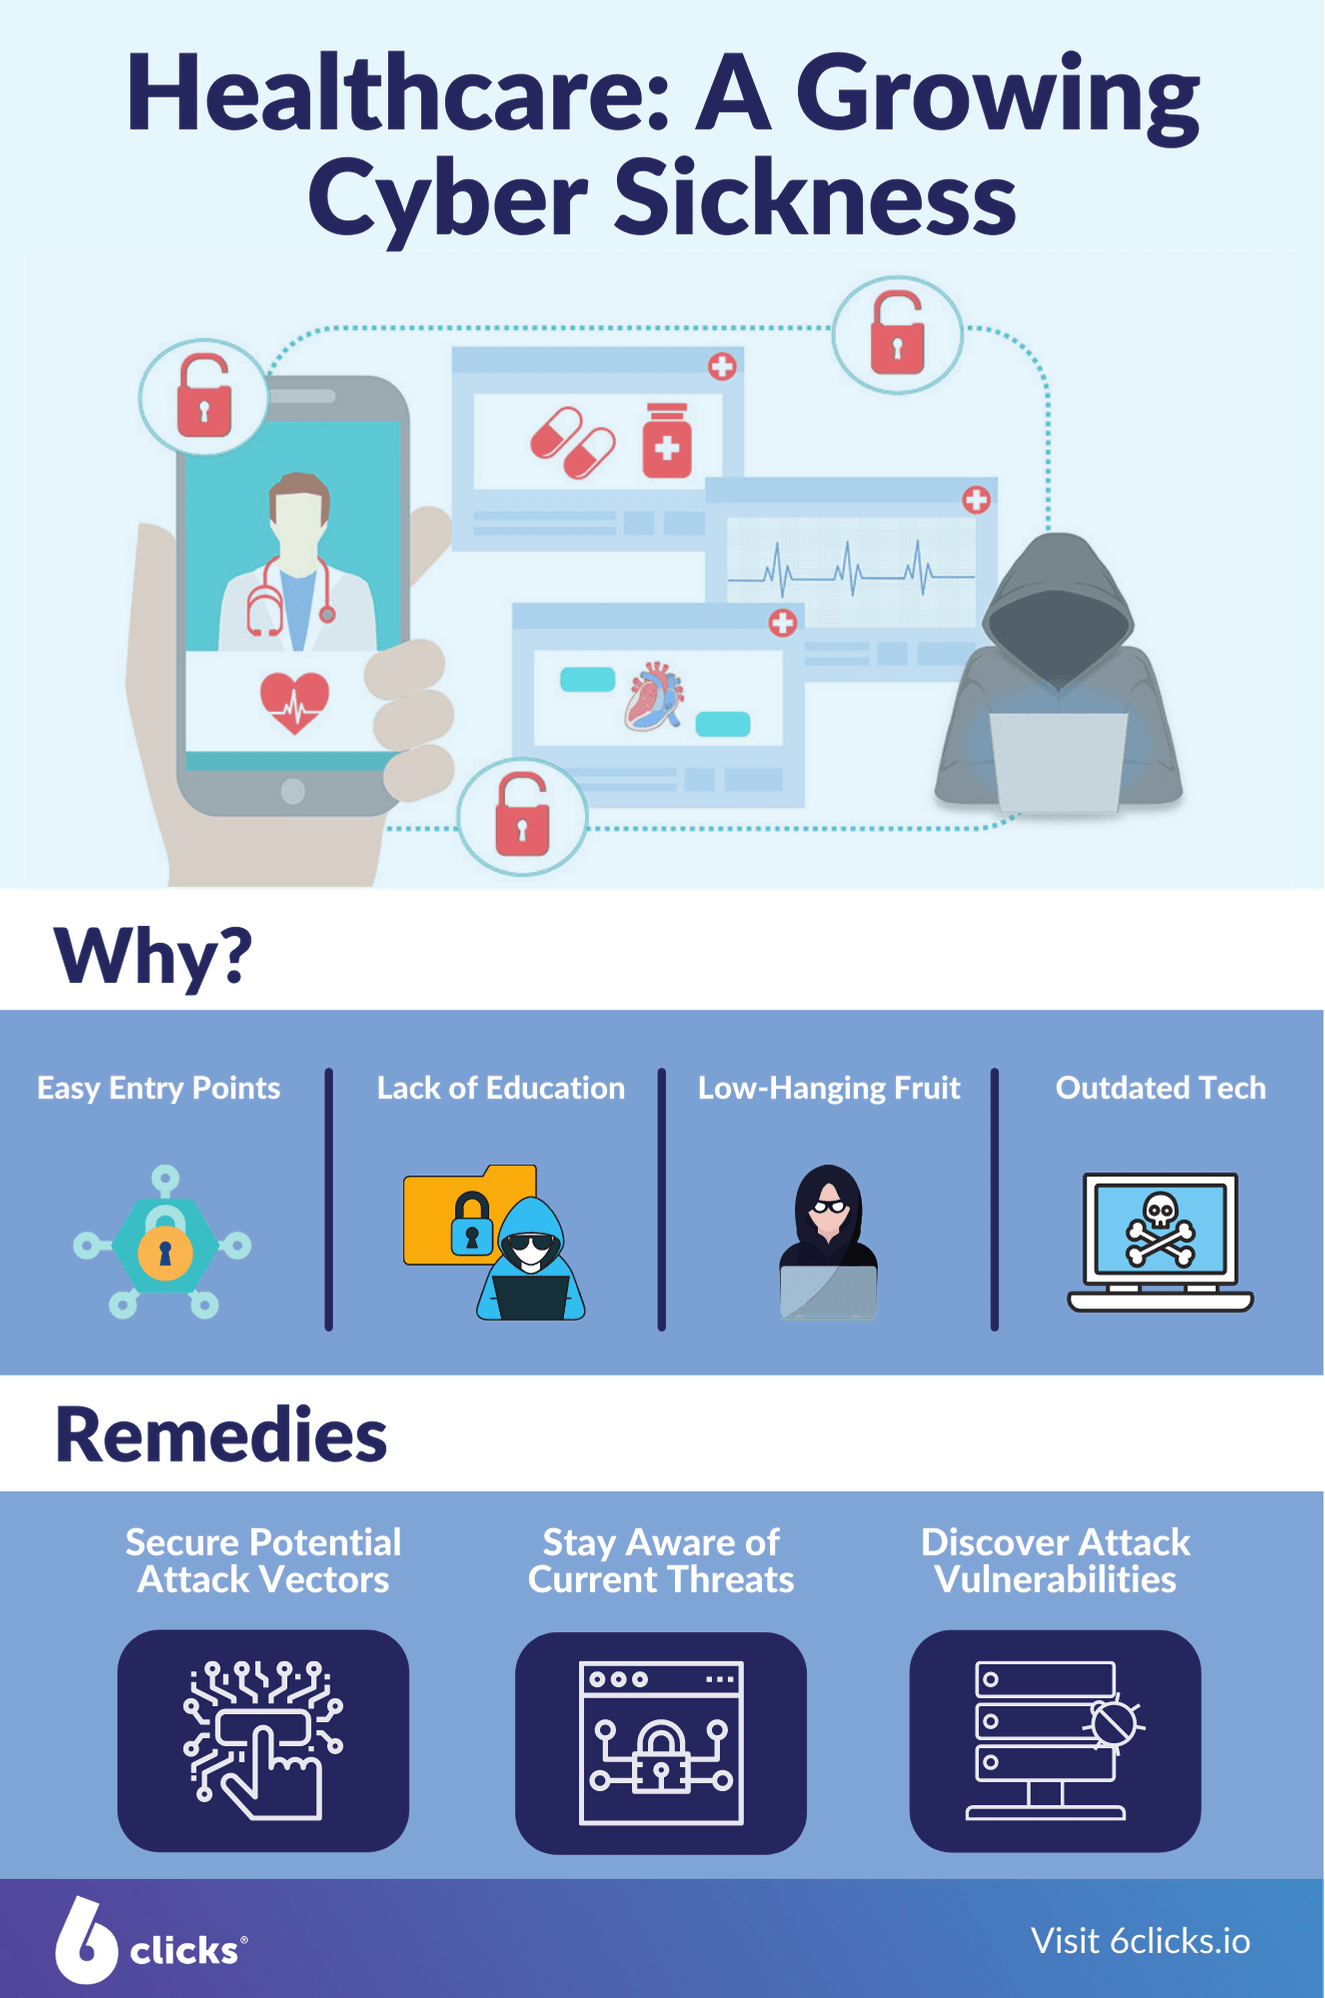 Healthcare Sector Infographic - 6clicks